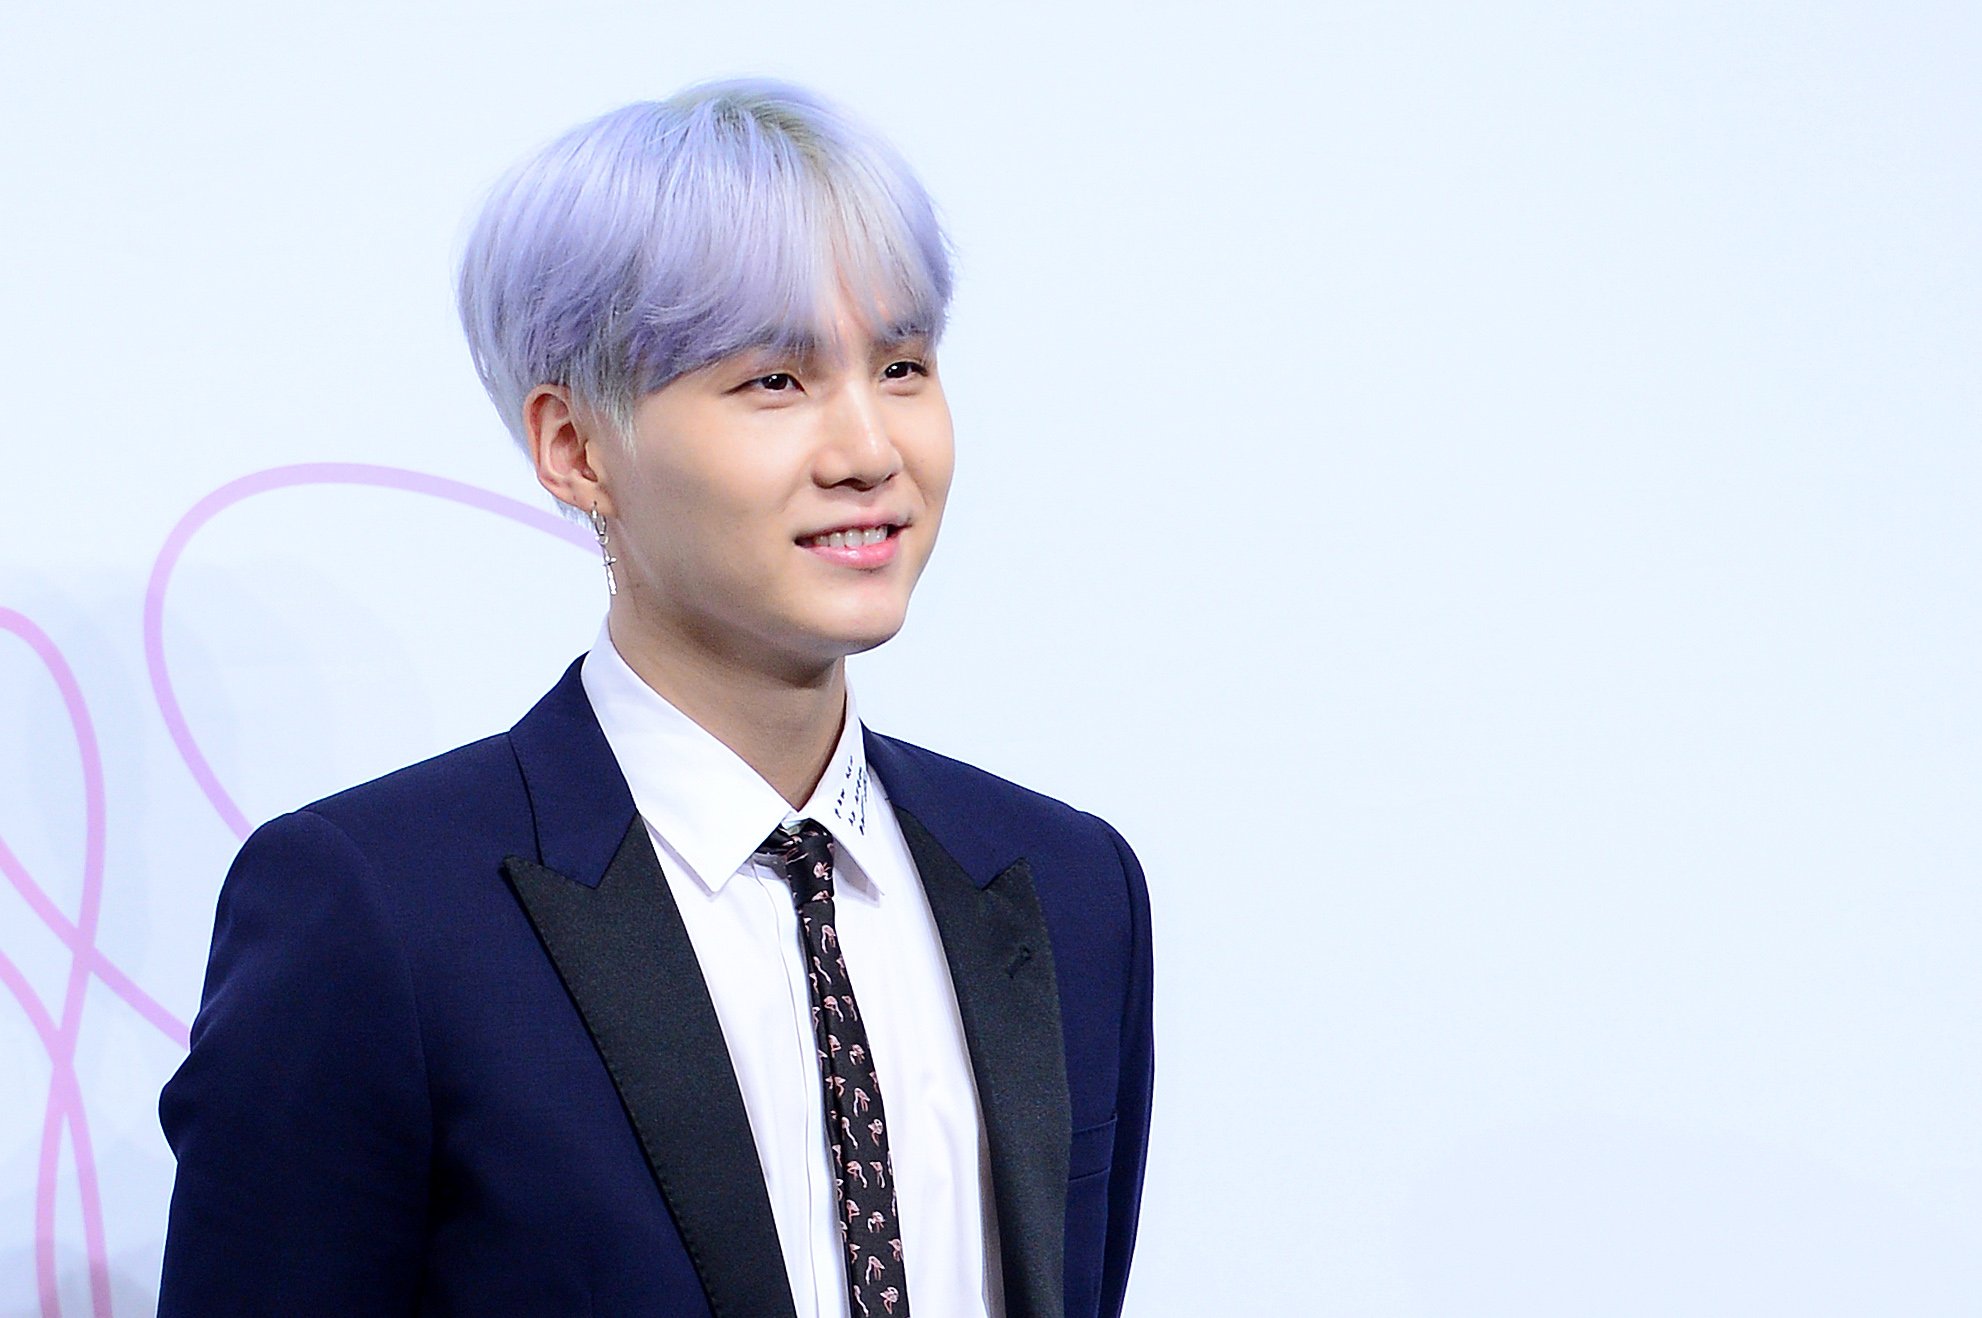 Suga of BTS attends the press conference for BTS's New Album 'LOVE YOURSELF: Her' release at Lotte Hotel Seoul